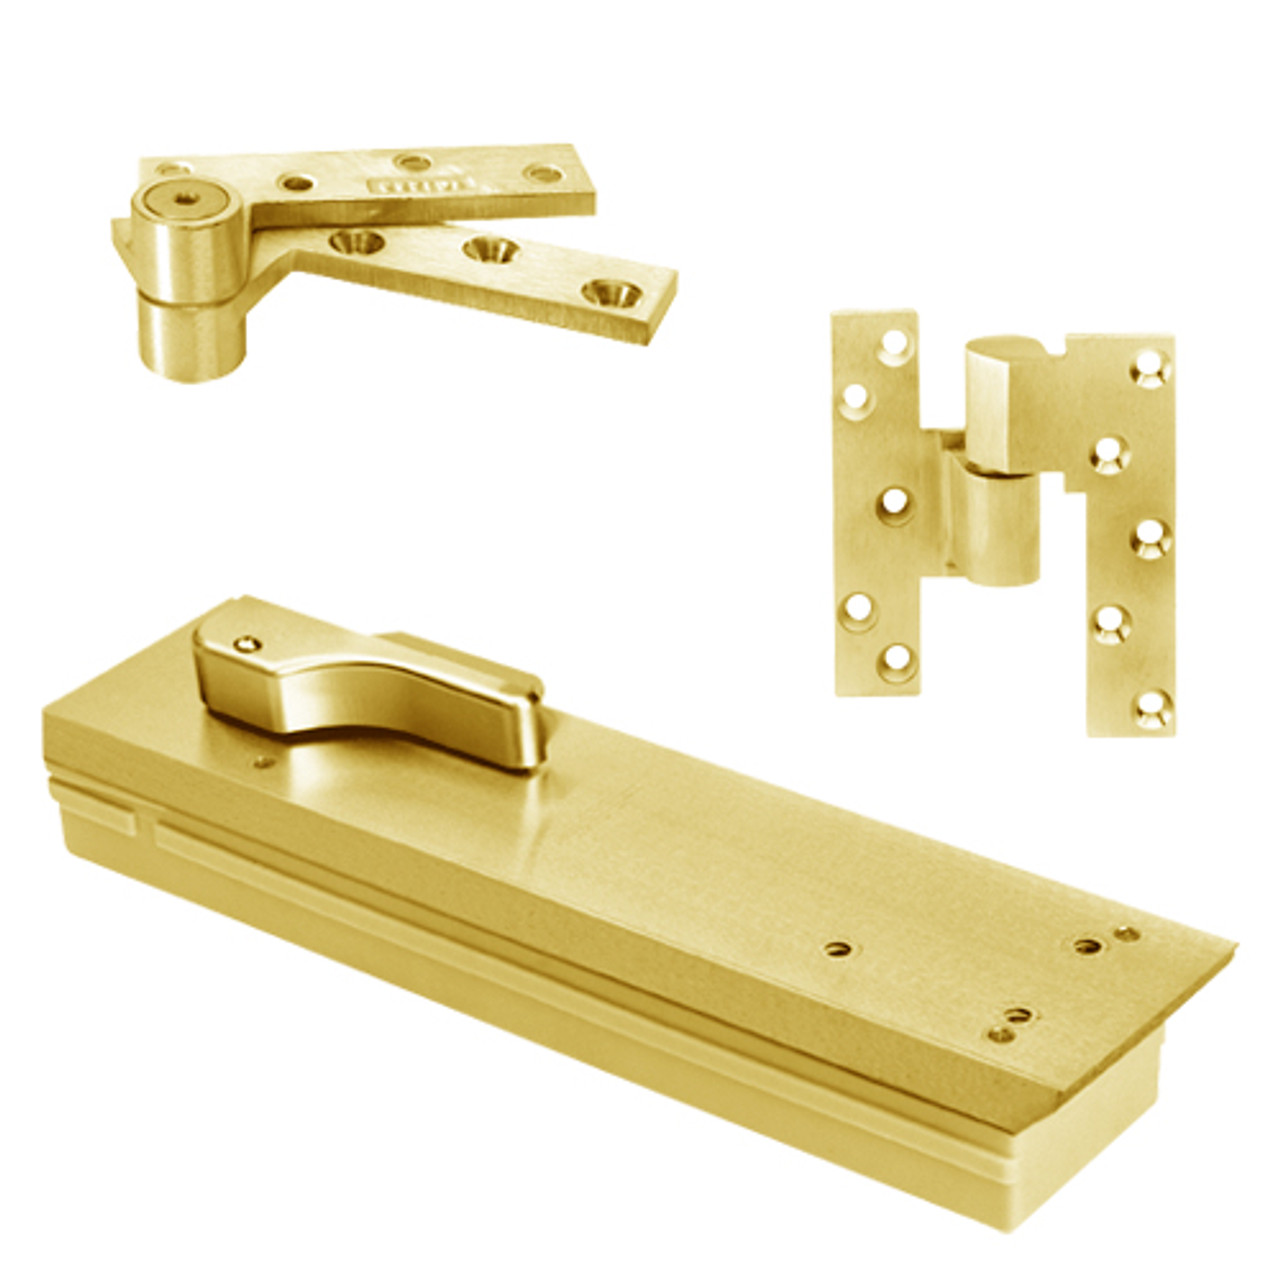 Q5105ABC105-LH-605 Rixson Q51 Series 3/4" Offset Hung Shallow Depth Floor Closers in Bright Brass Finish